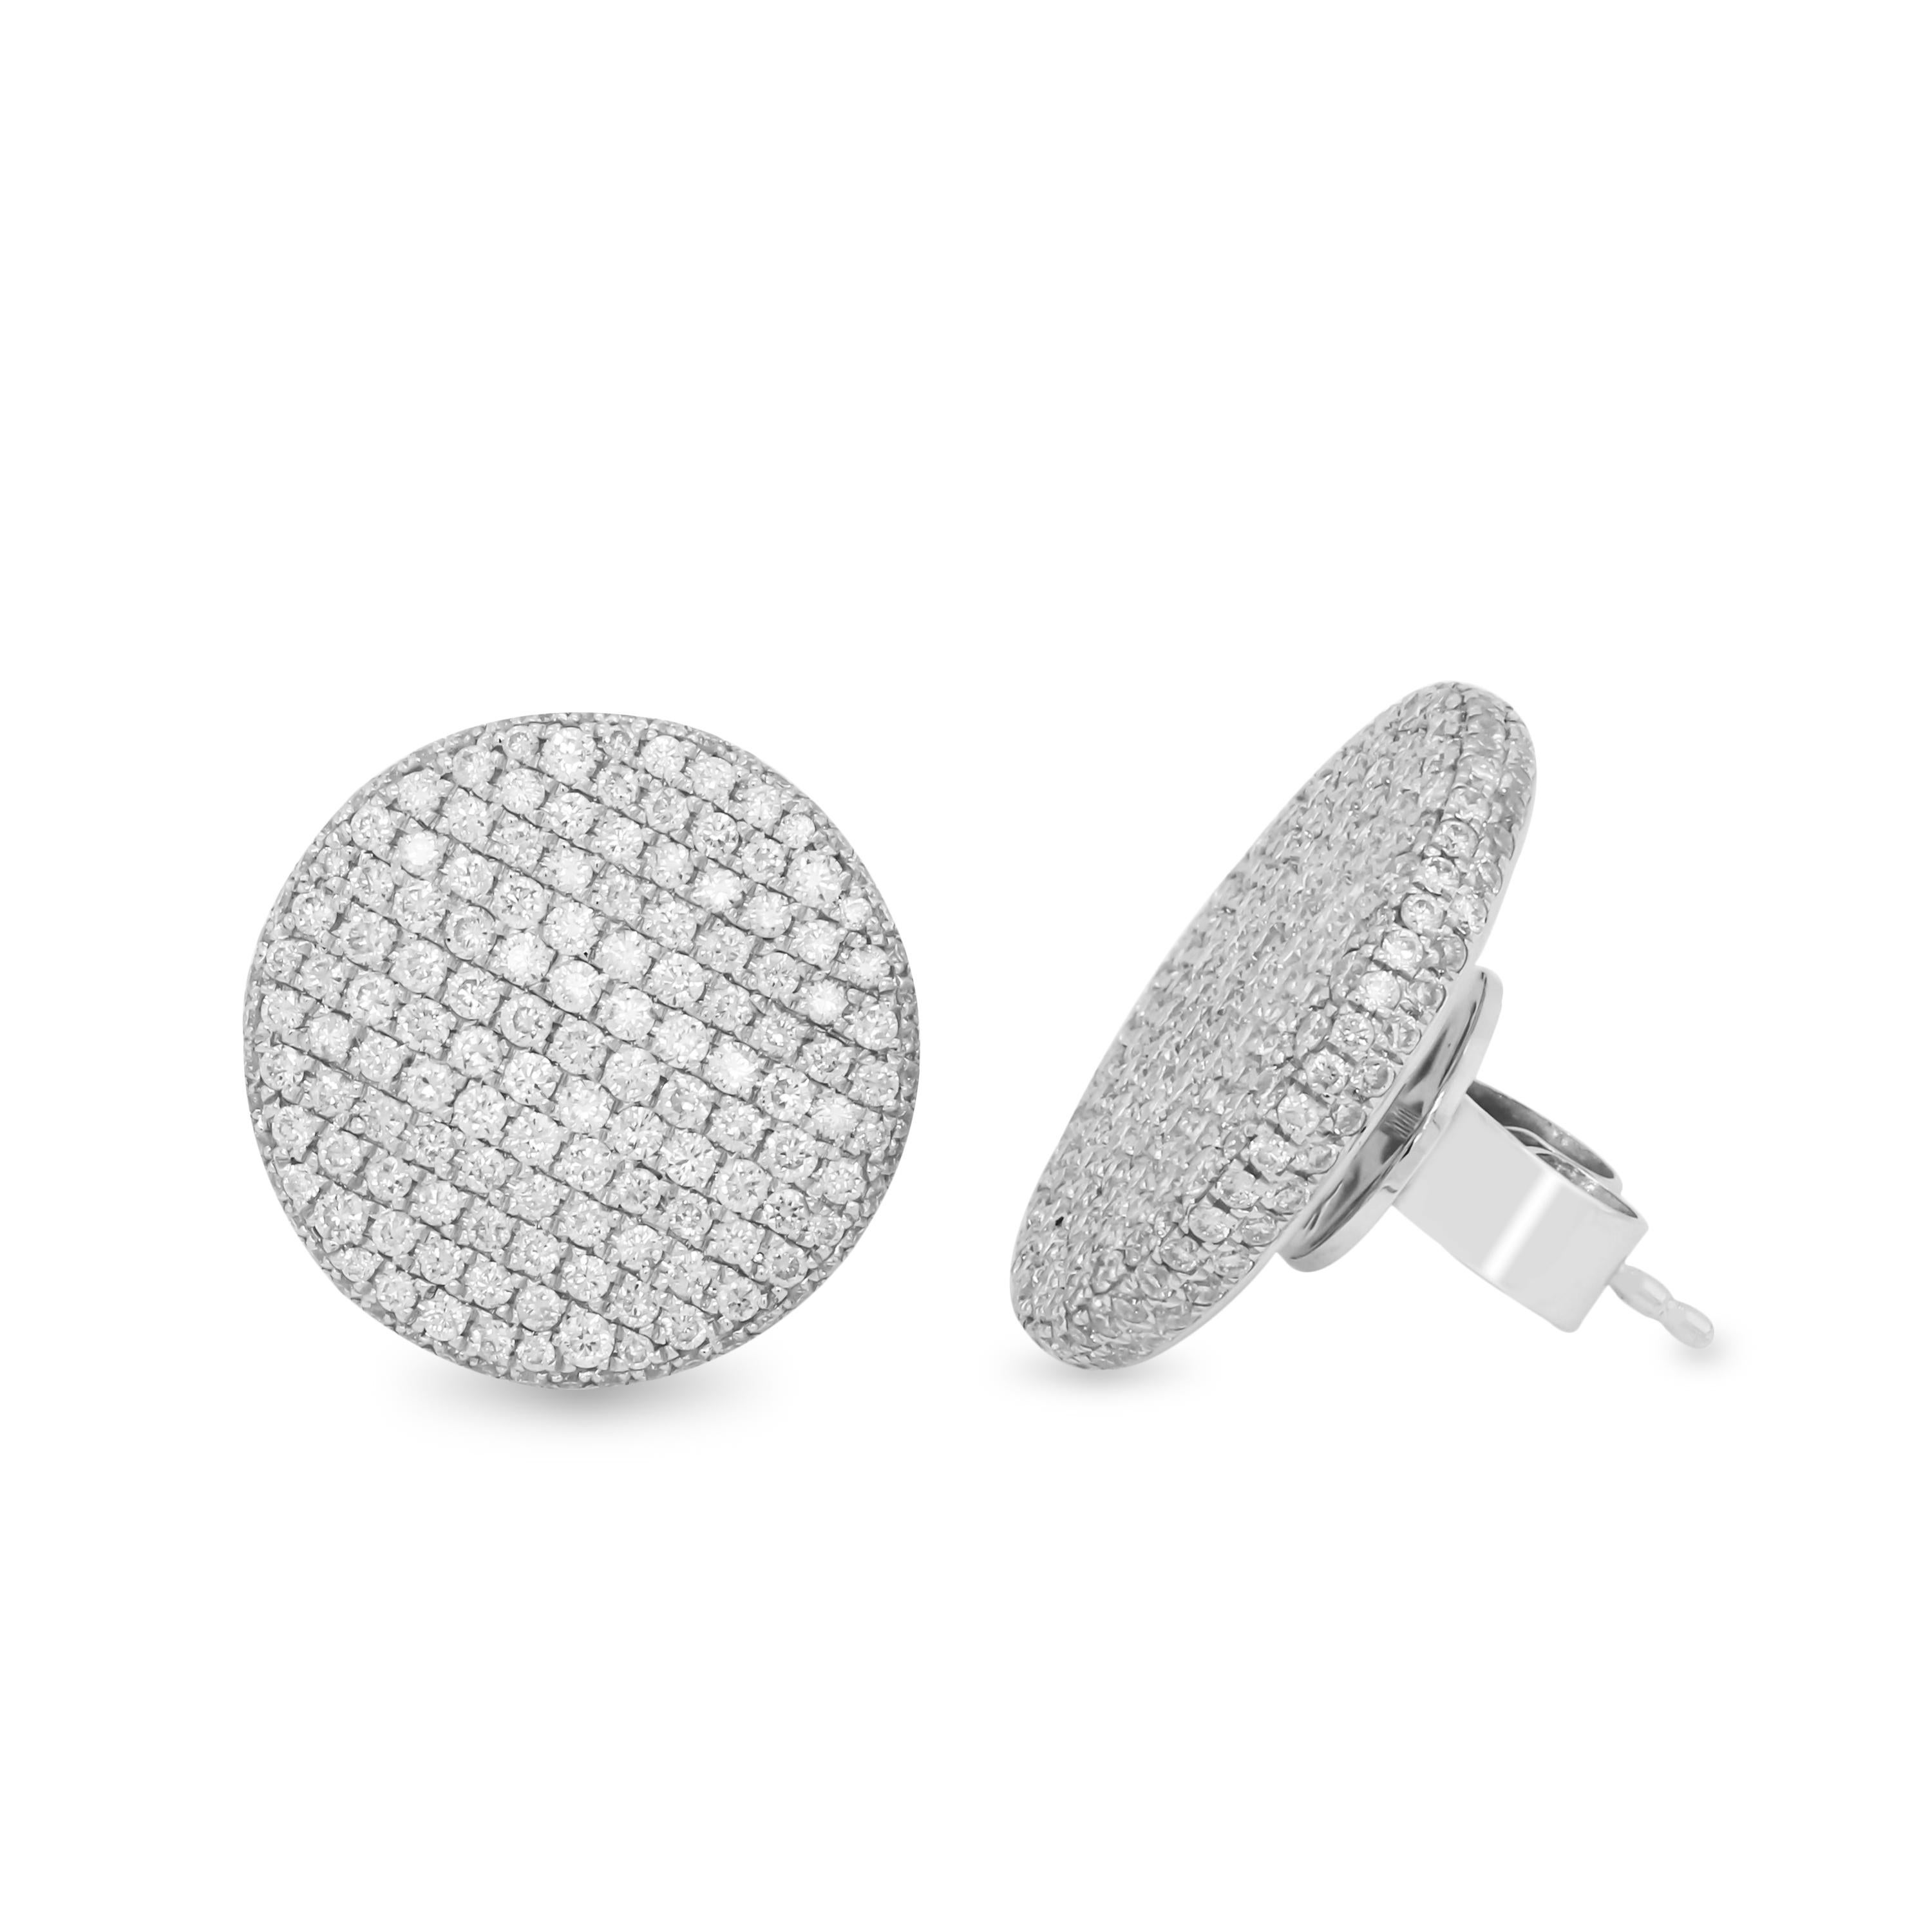 18K White Gold and Diamond Circle Disk Stud Earrings

These fun, everyday earrings feature a circle, disk design with pave set diamonds all throughout.

2.82 carat G color, VS clarity diamonds total weight

0.71 inch width. They are a perfect size